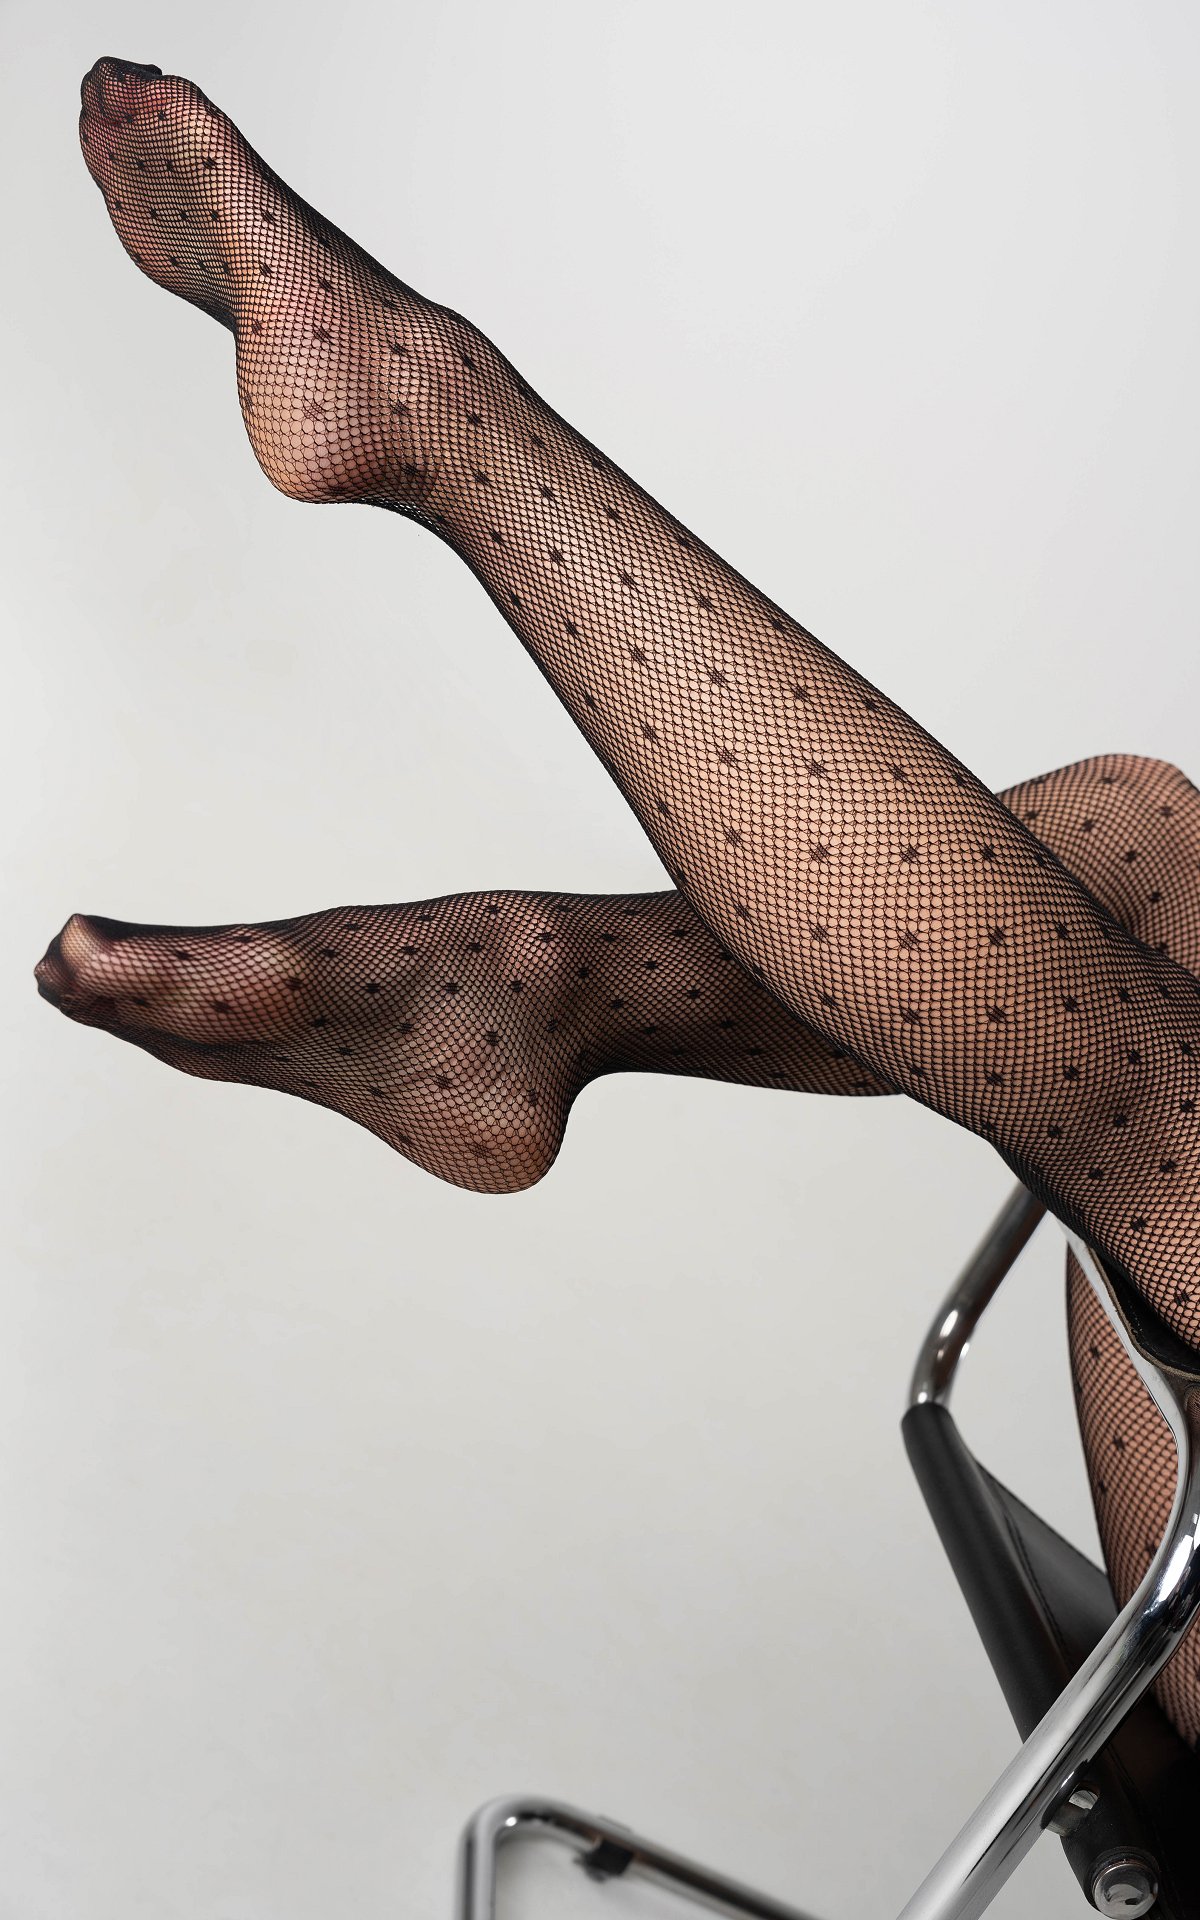 Tights with dots - Black, Guts & Gusto